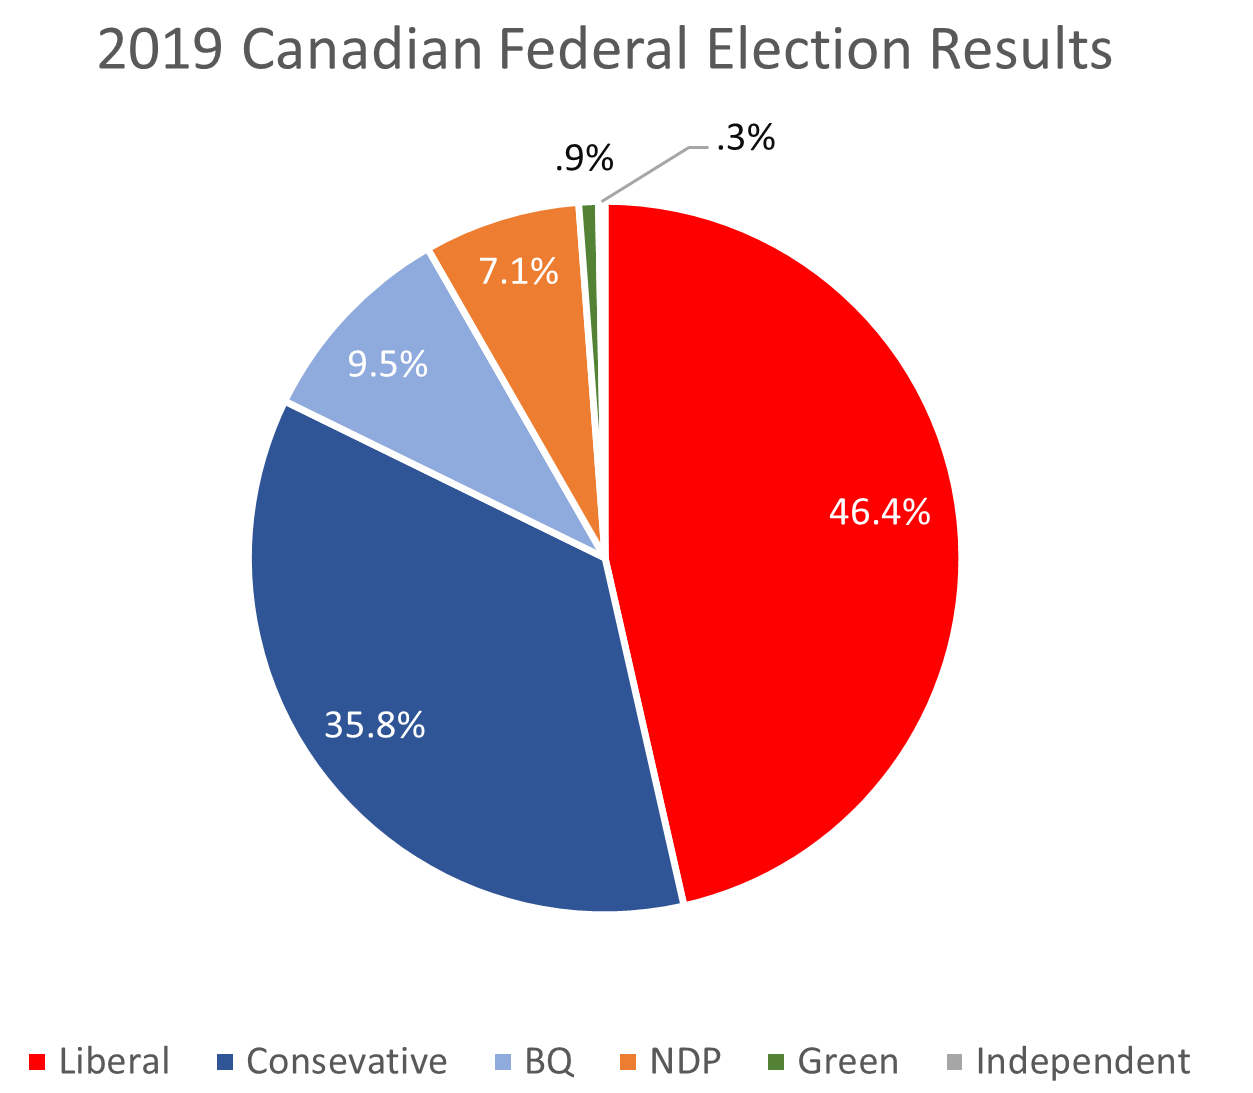 A pie chart shows what percent of seats went to which political parties in the 2019 Canadian Federal Election.